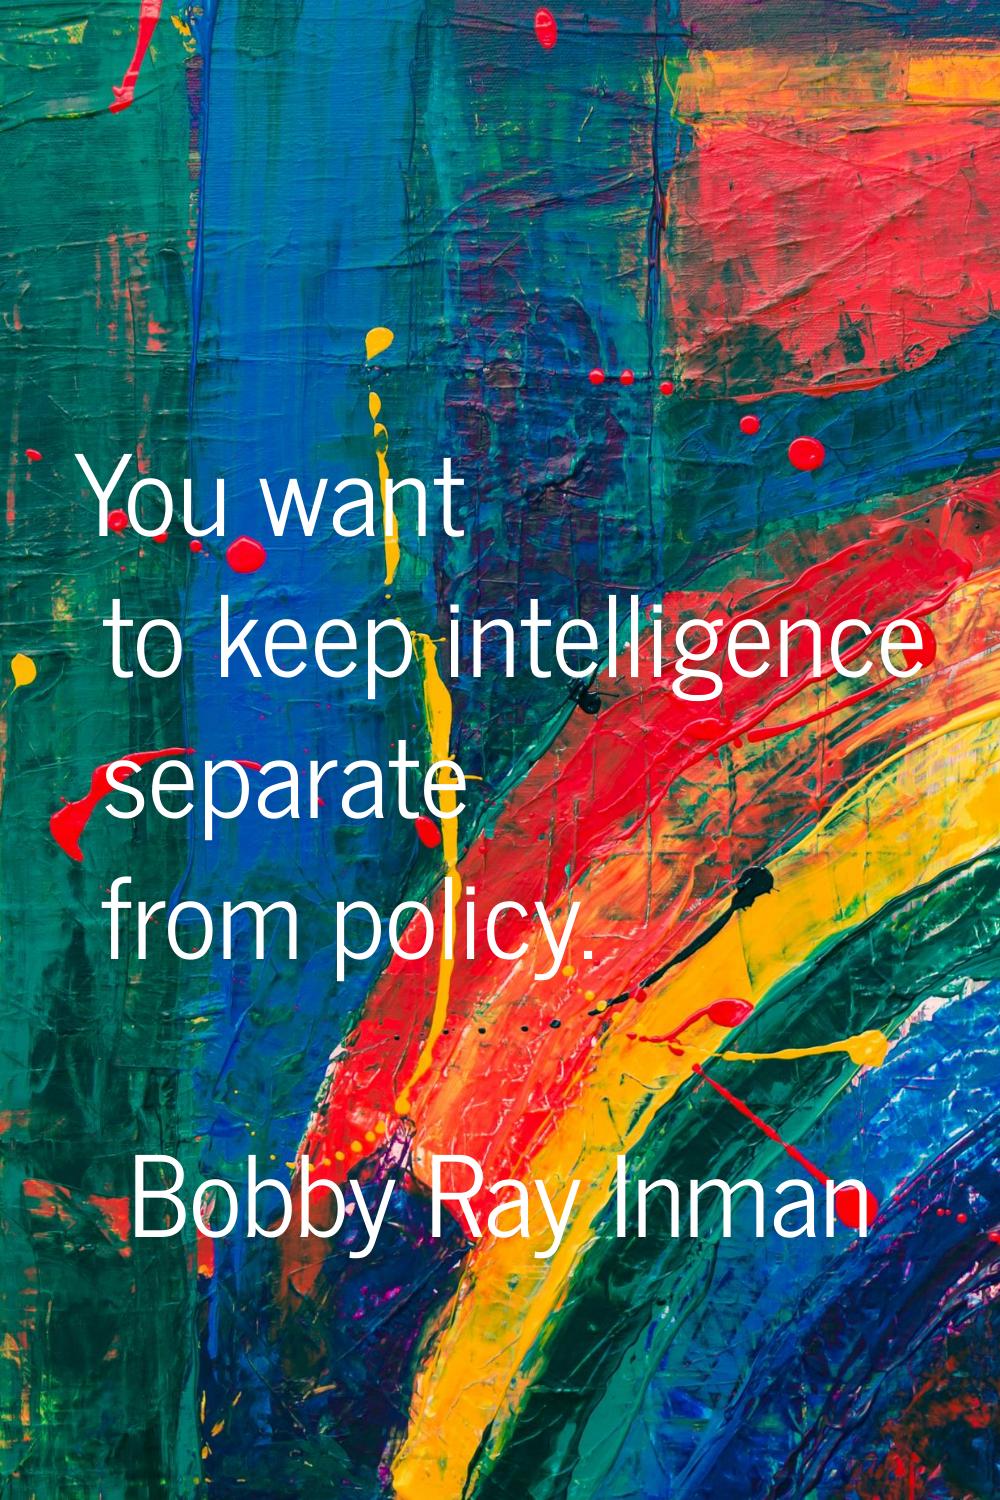 You want to keep intelligence separate from policy.